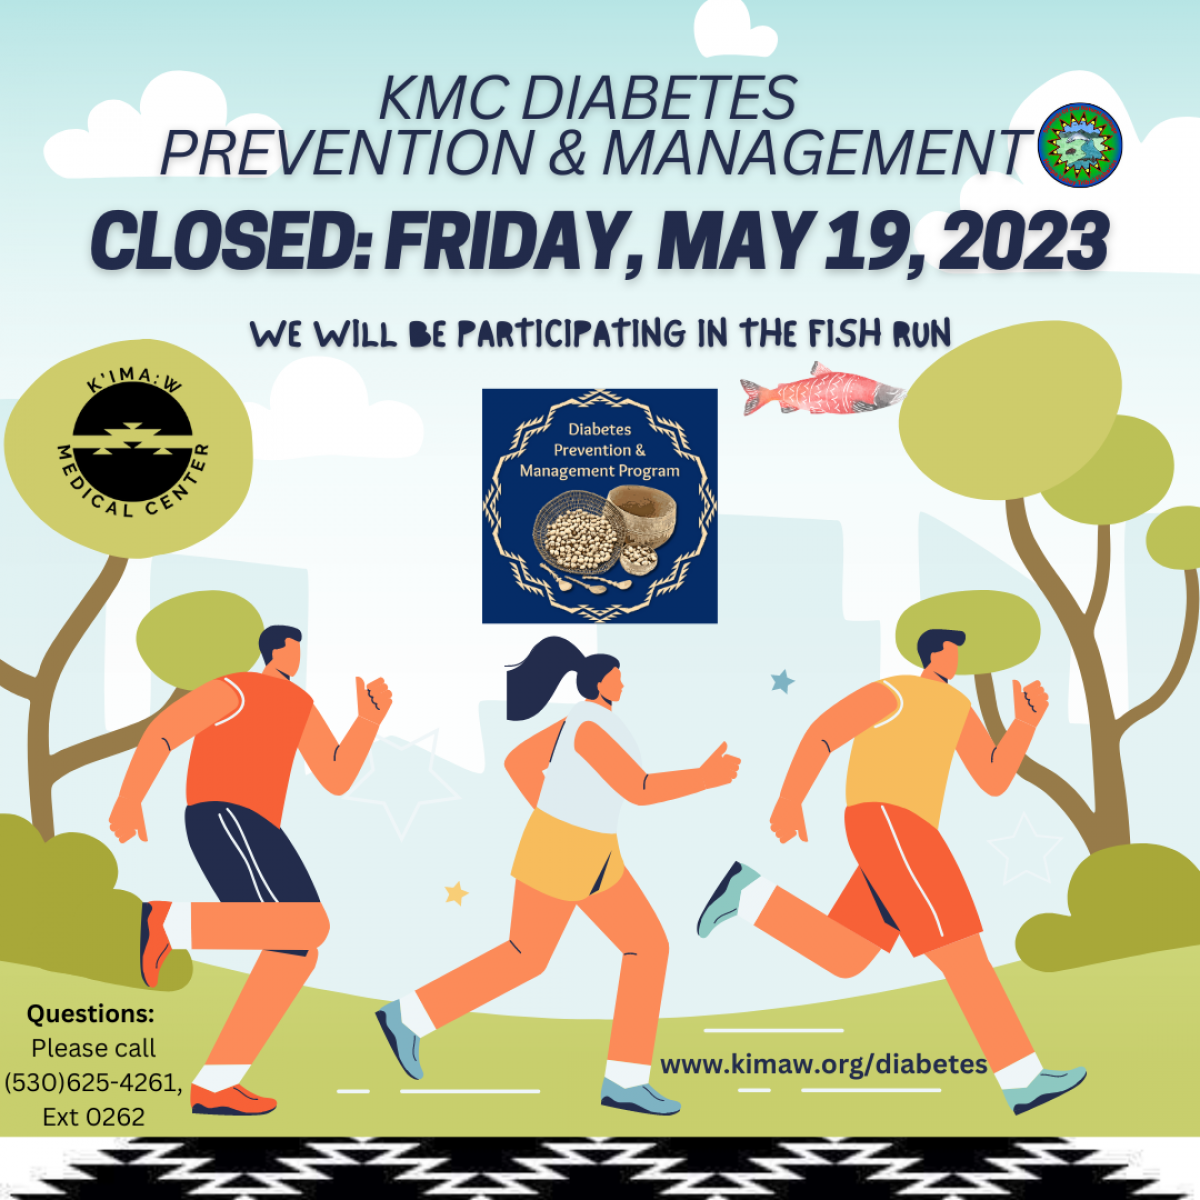 Diabetes Building Closure for May 19, 2023